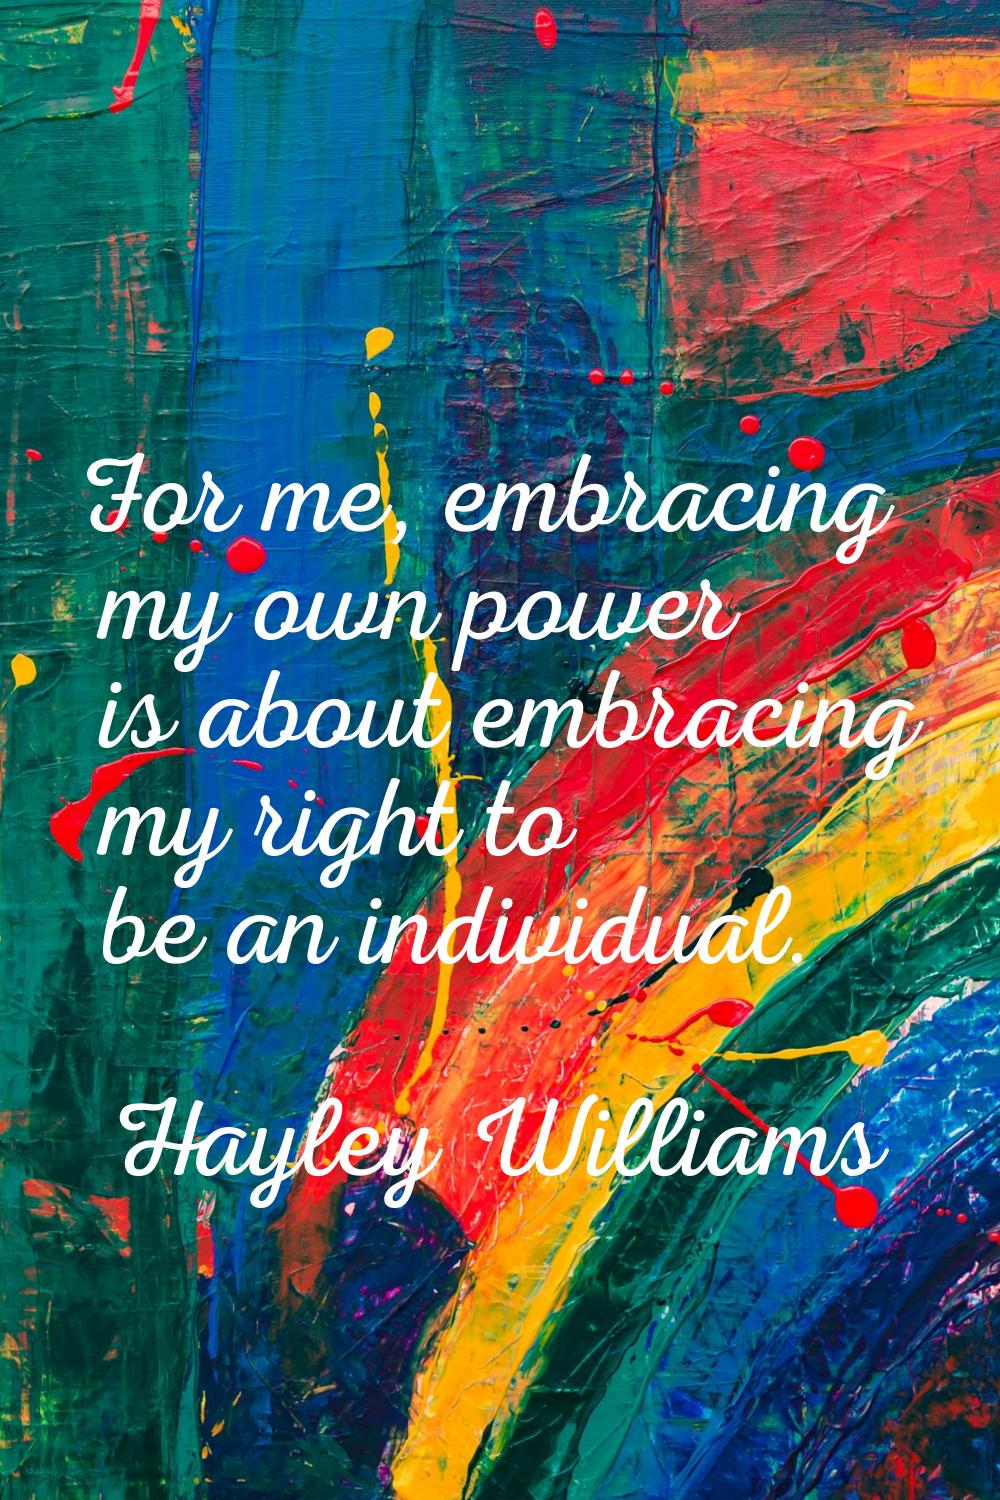 For me, embracing my own power is about embracing my right to be an individual.